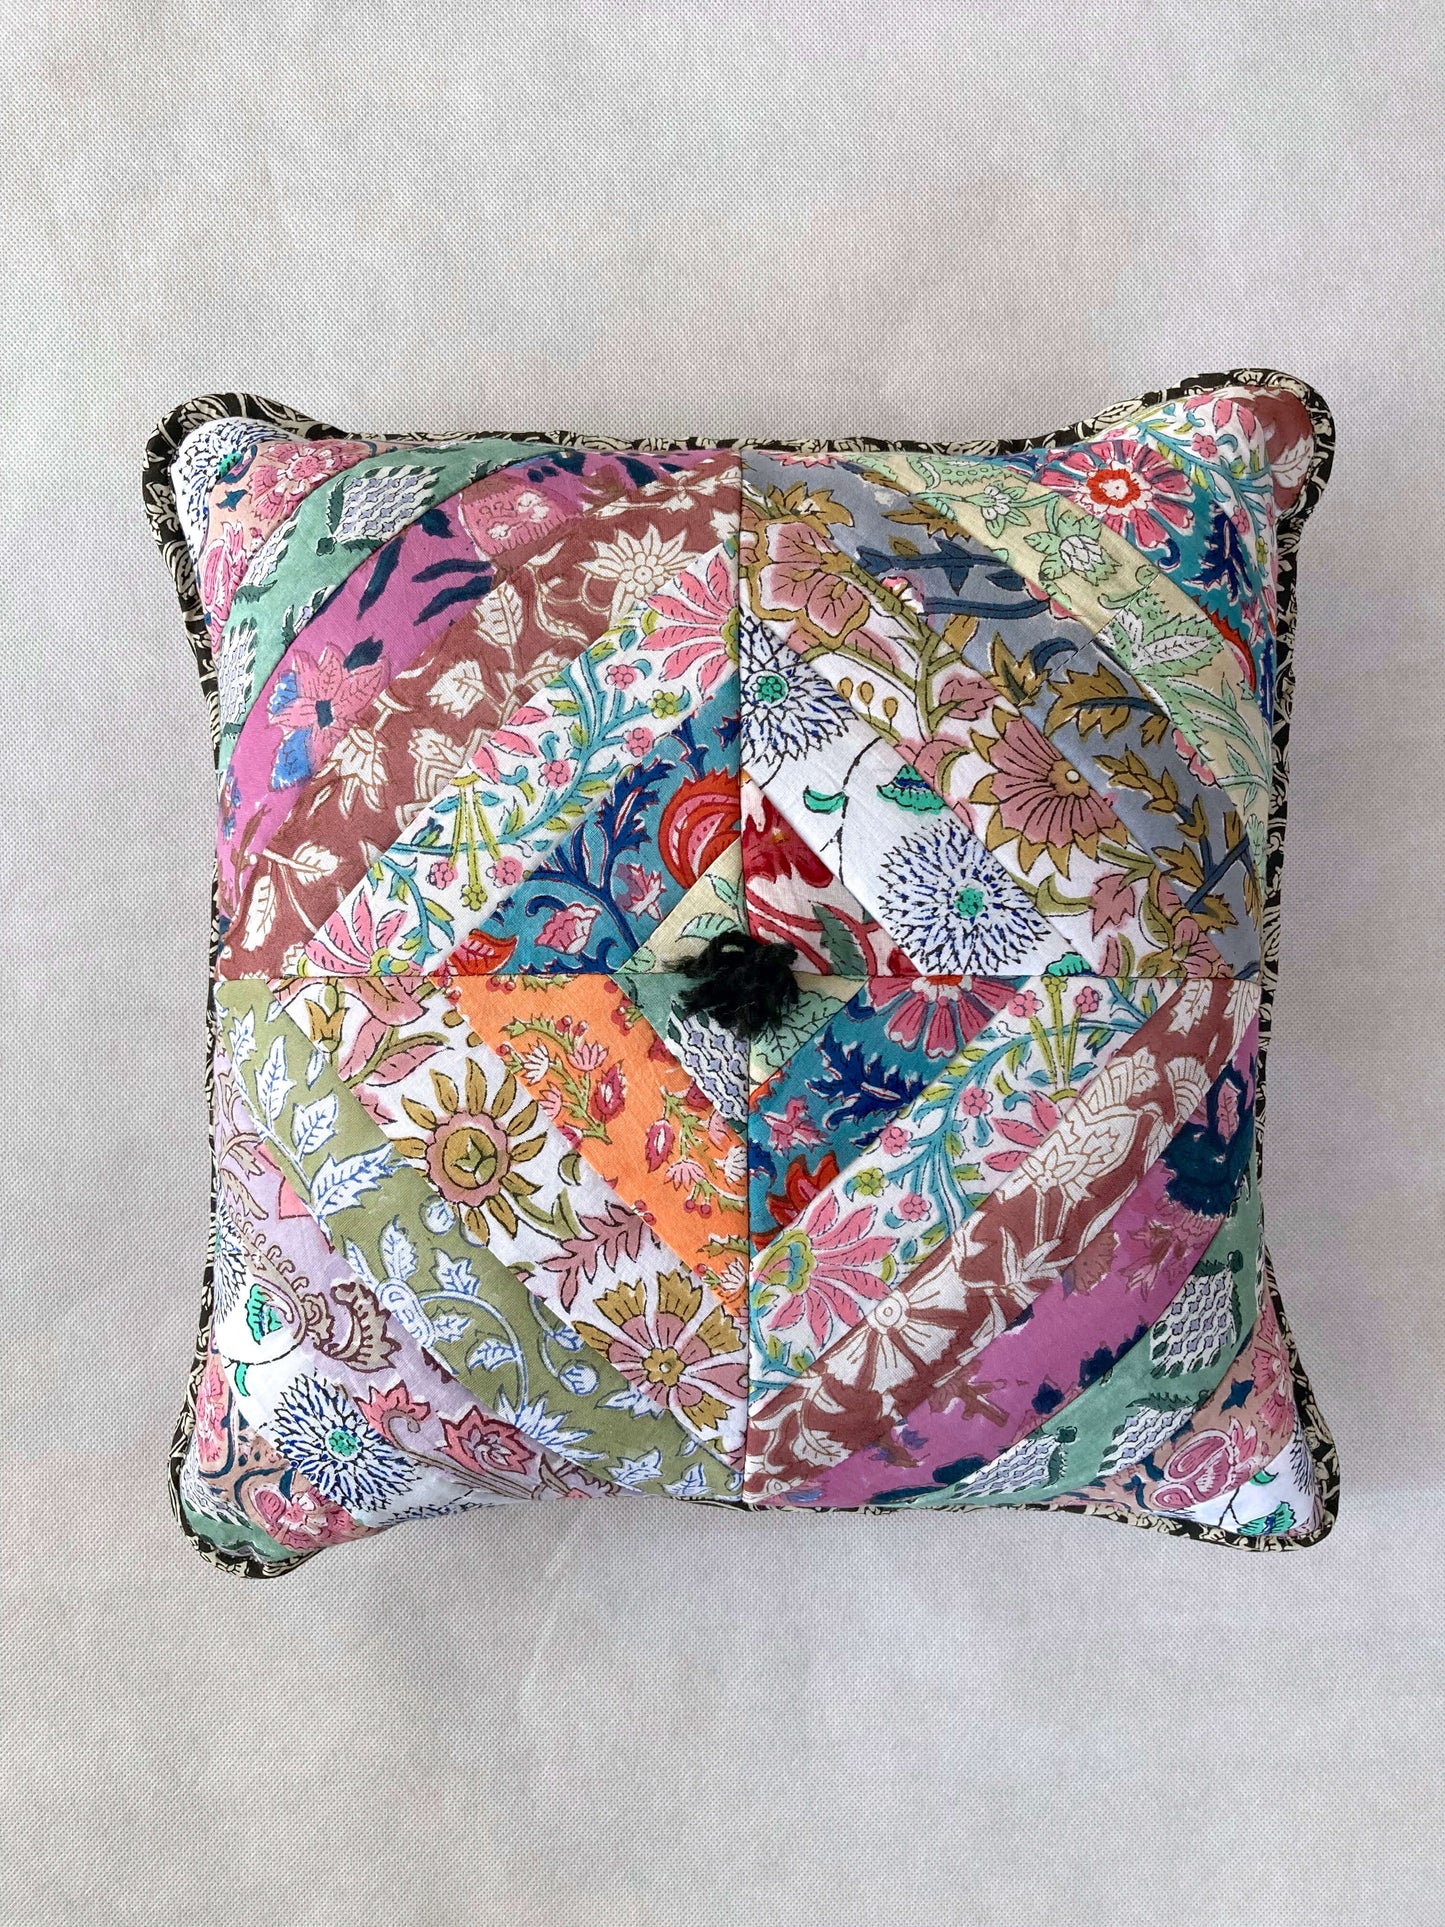 Hand Block Printed Fabric Patchwork Quilting Cushion Cover